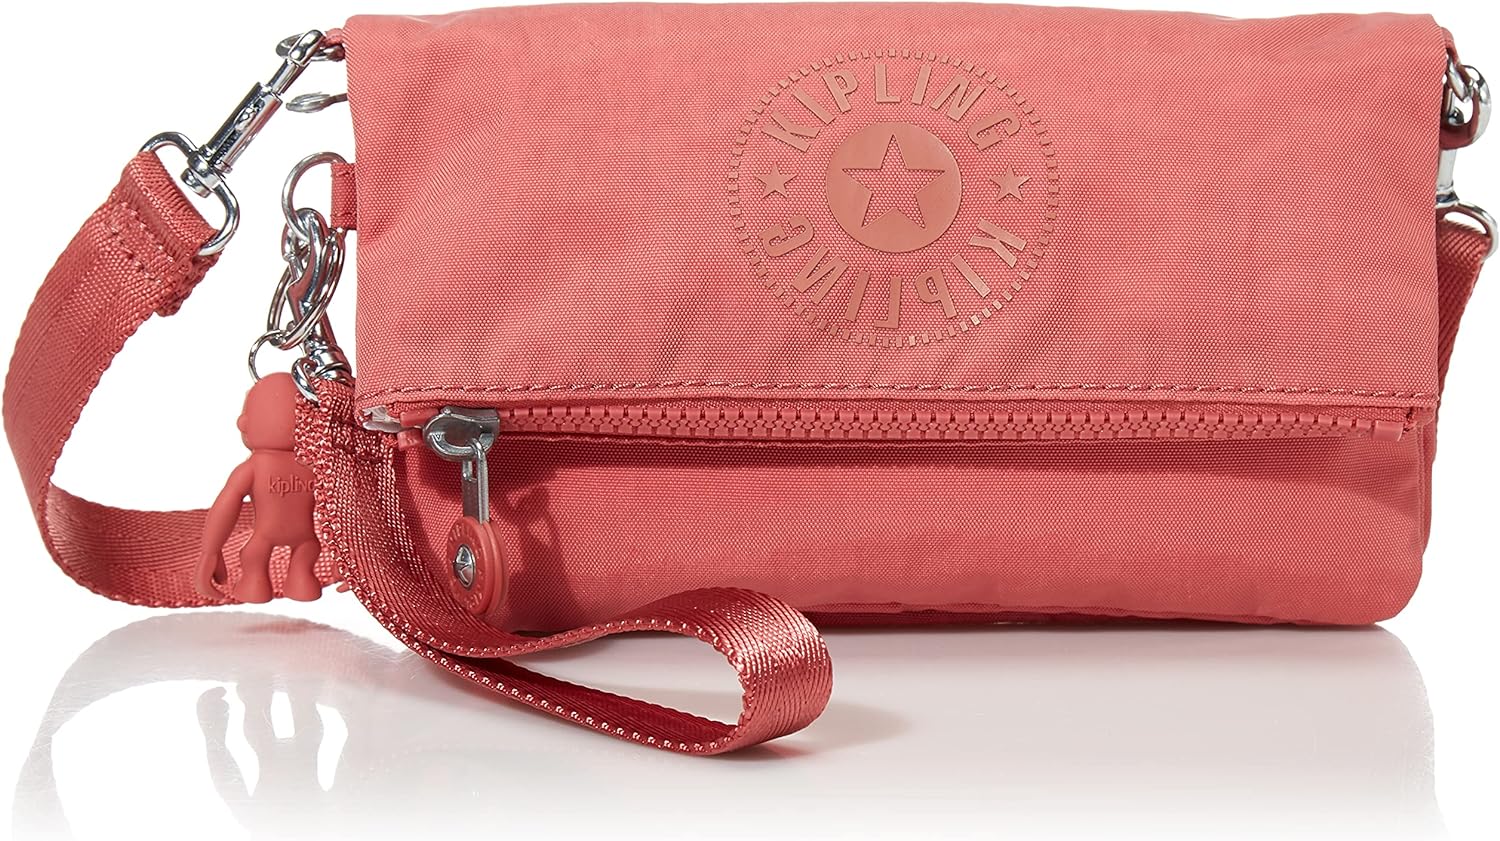 Are You Looking For a Cute Mini Crossbody Purse: Discover Why the Kipling Art Mini Bag is a Must-Have